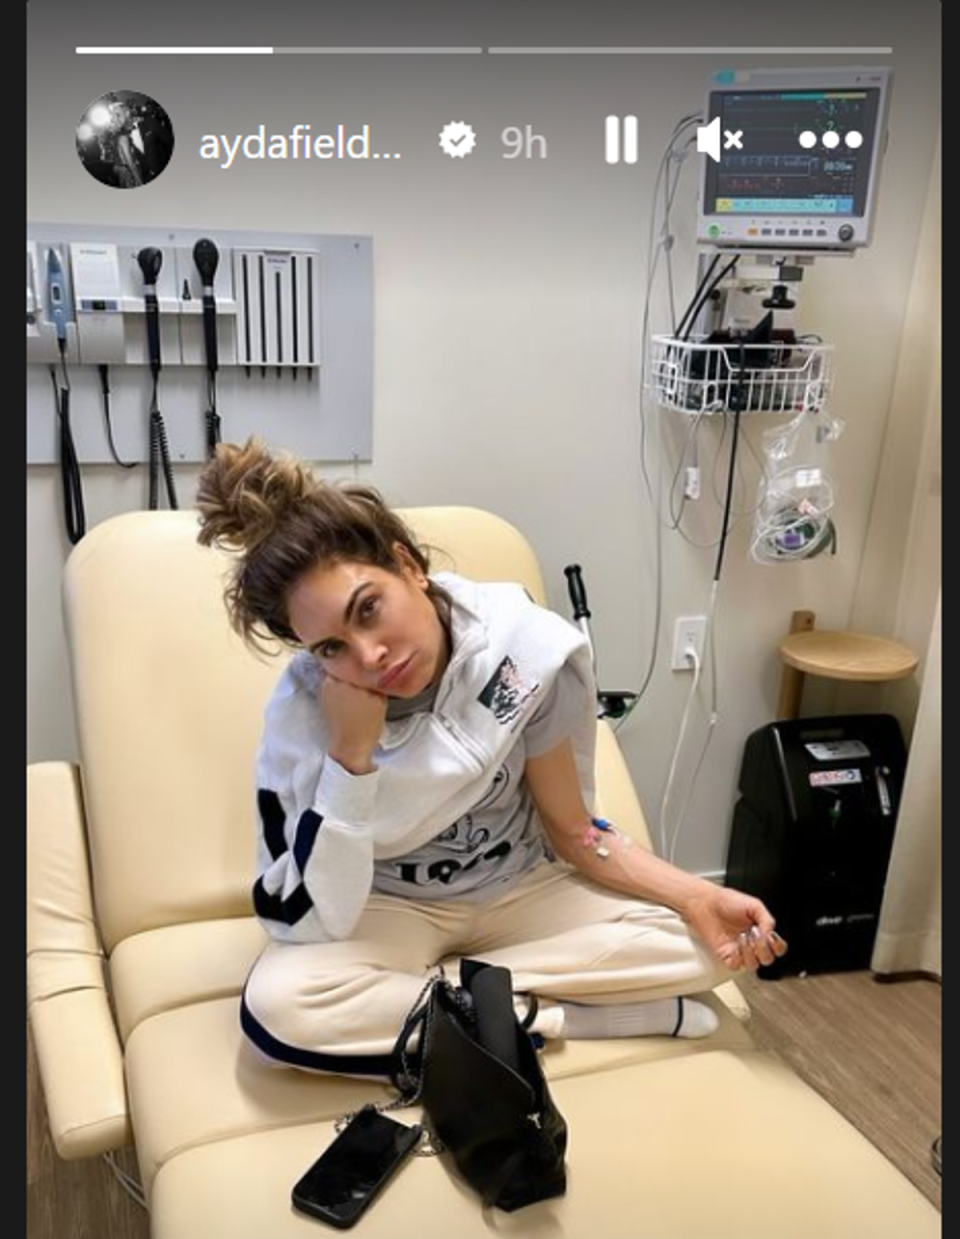 Ayda Field sparked concern when she revealed she was on a drip in hospital (AydaField/Instagram)